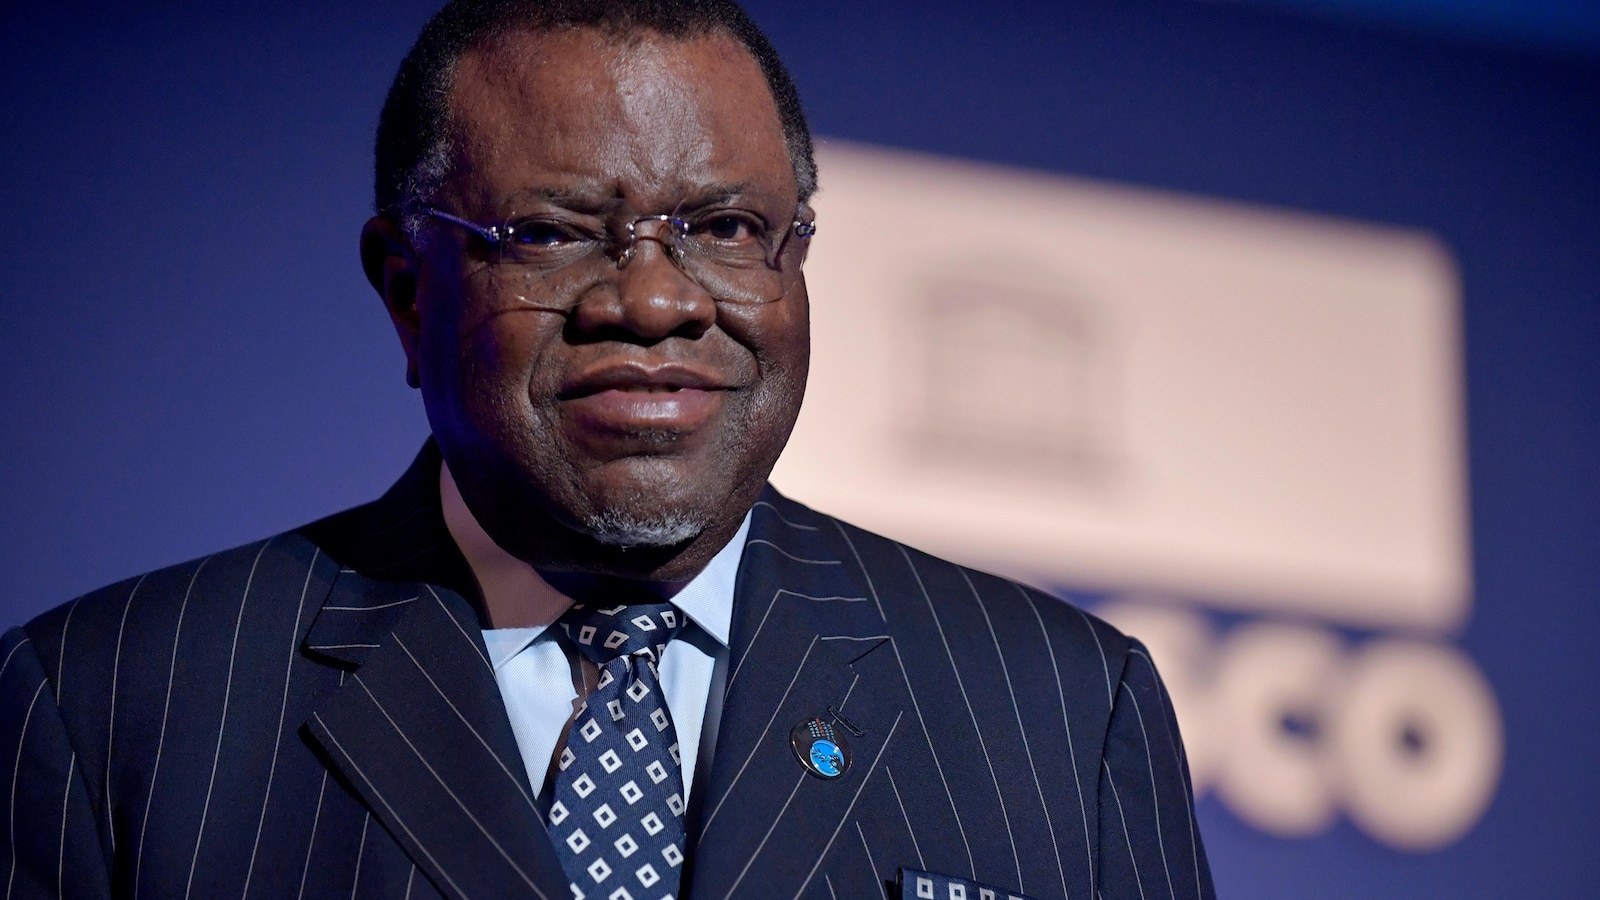 Namibian President Hage Geingob Passes Away While Undergoing Medical Treatment, Confirms Office